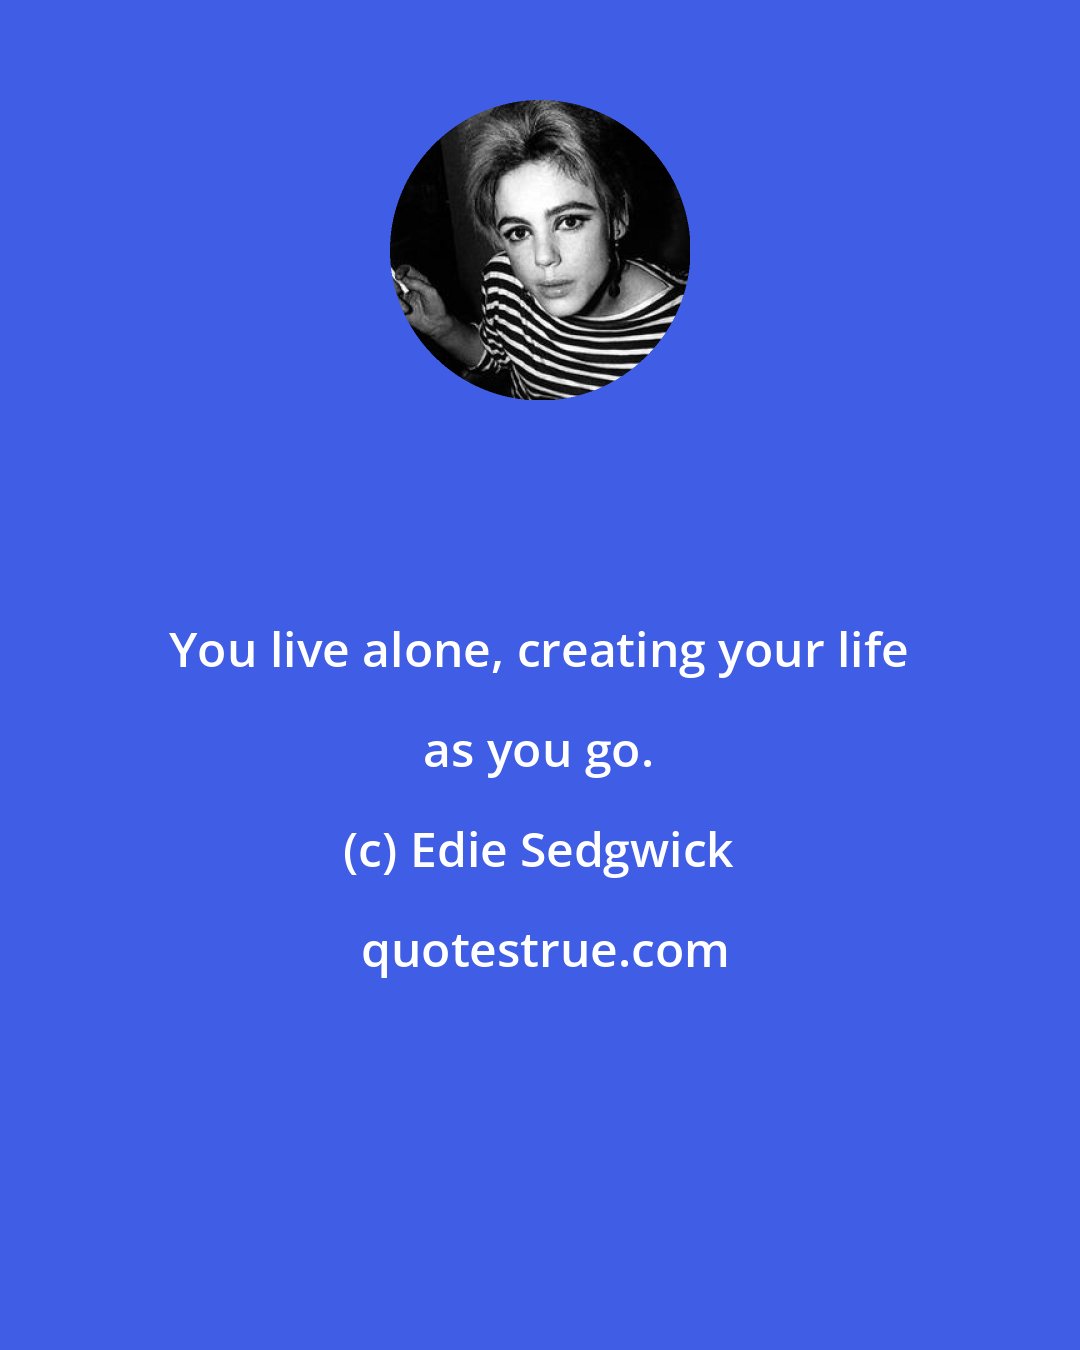 Edie Sedgwick: You live alone, creating your life as you go.